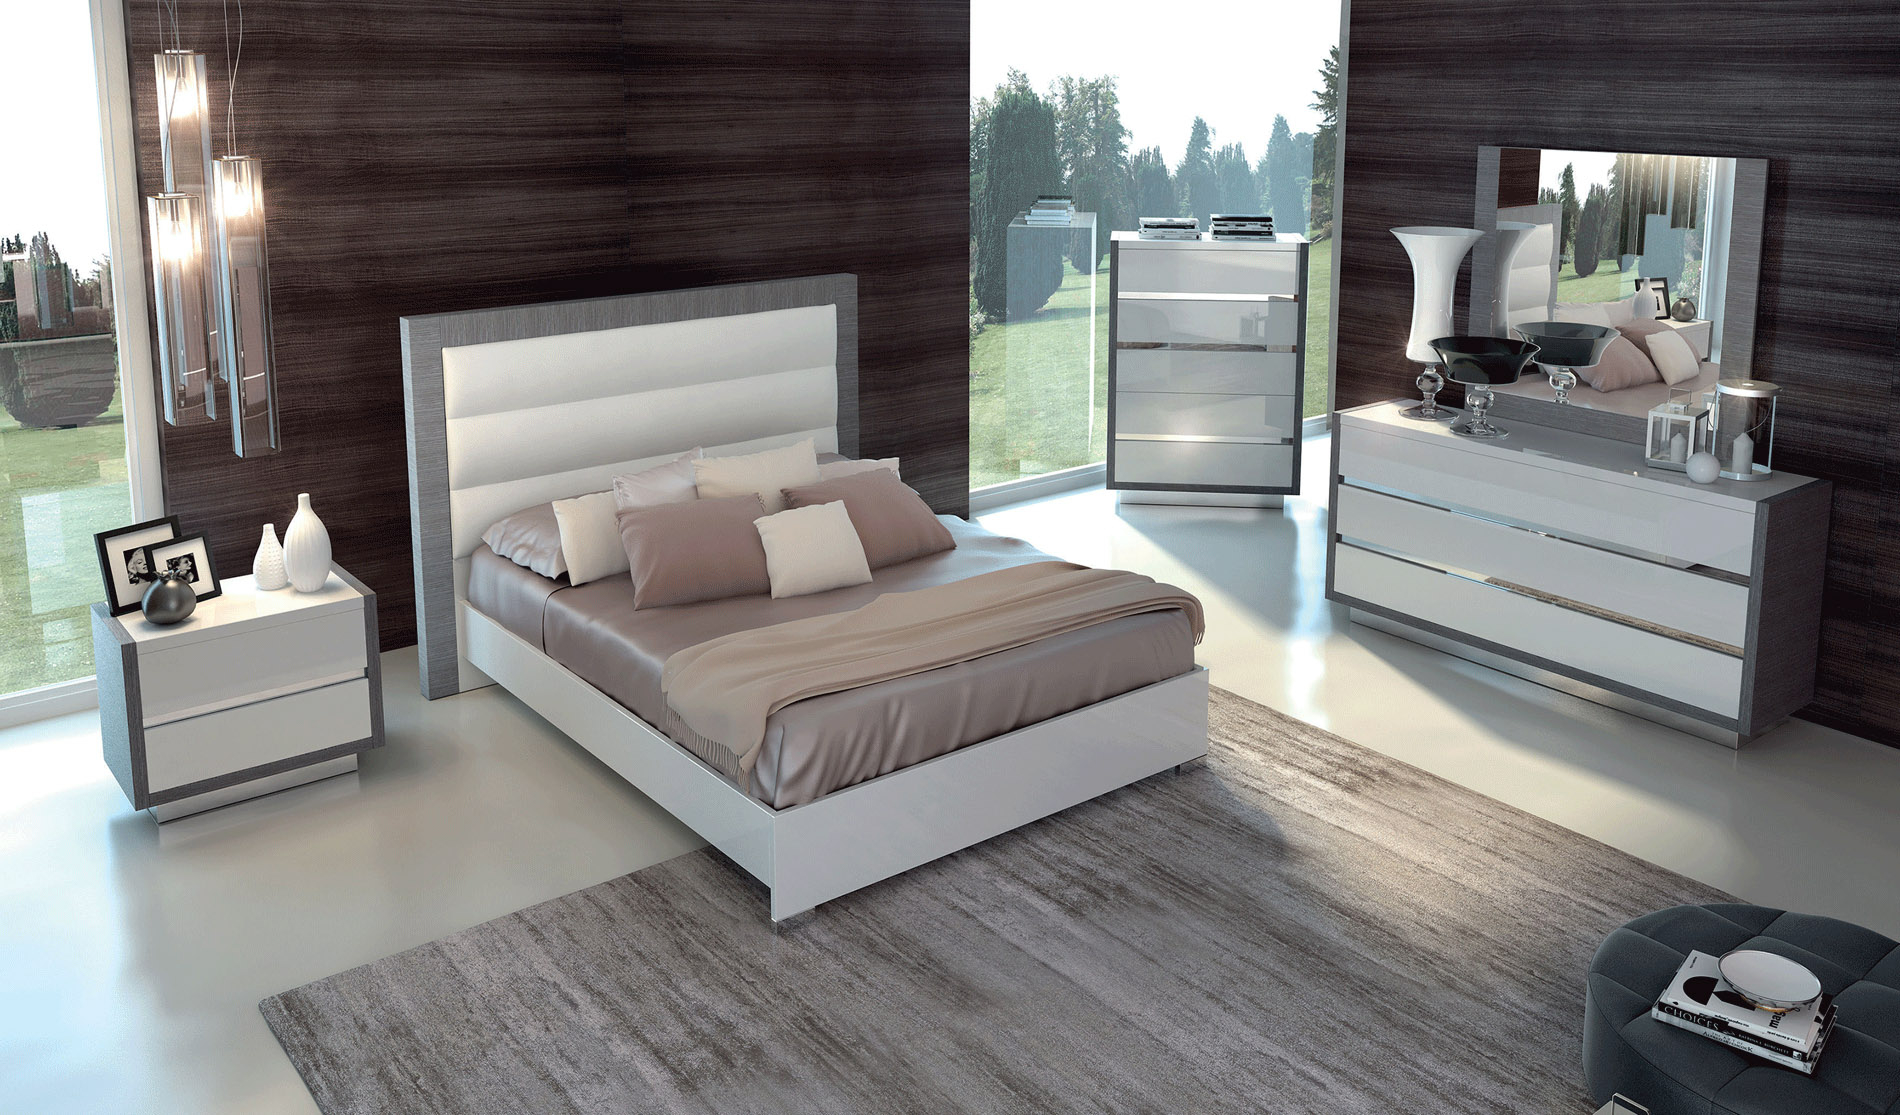 Made In Italy Quality Luxury Bedroom Sets pertaining to size 1900 X 1115